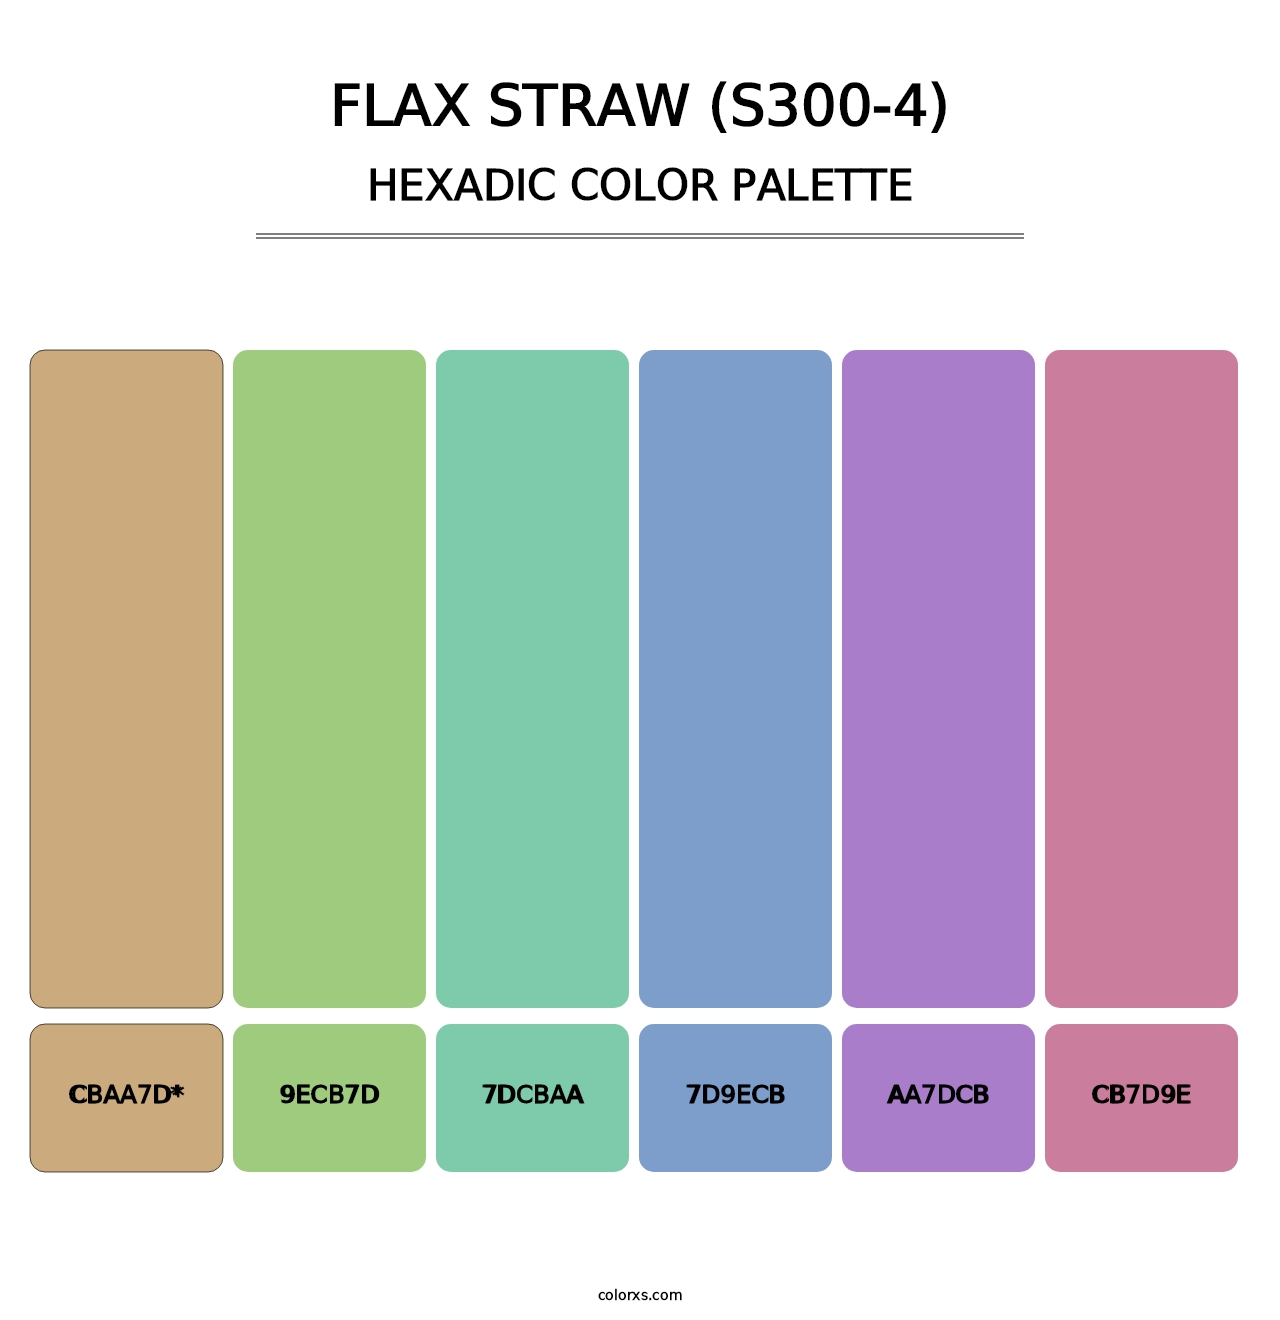 Flax Straw (S300-4) - Hexadic Color Palette